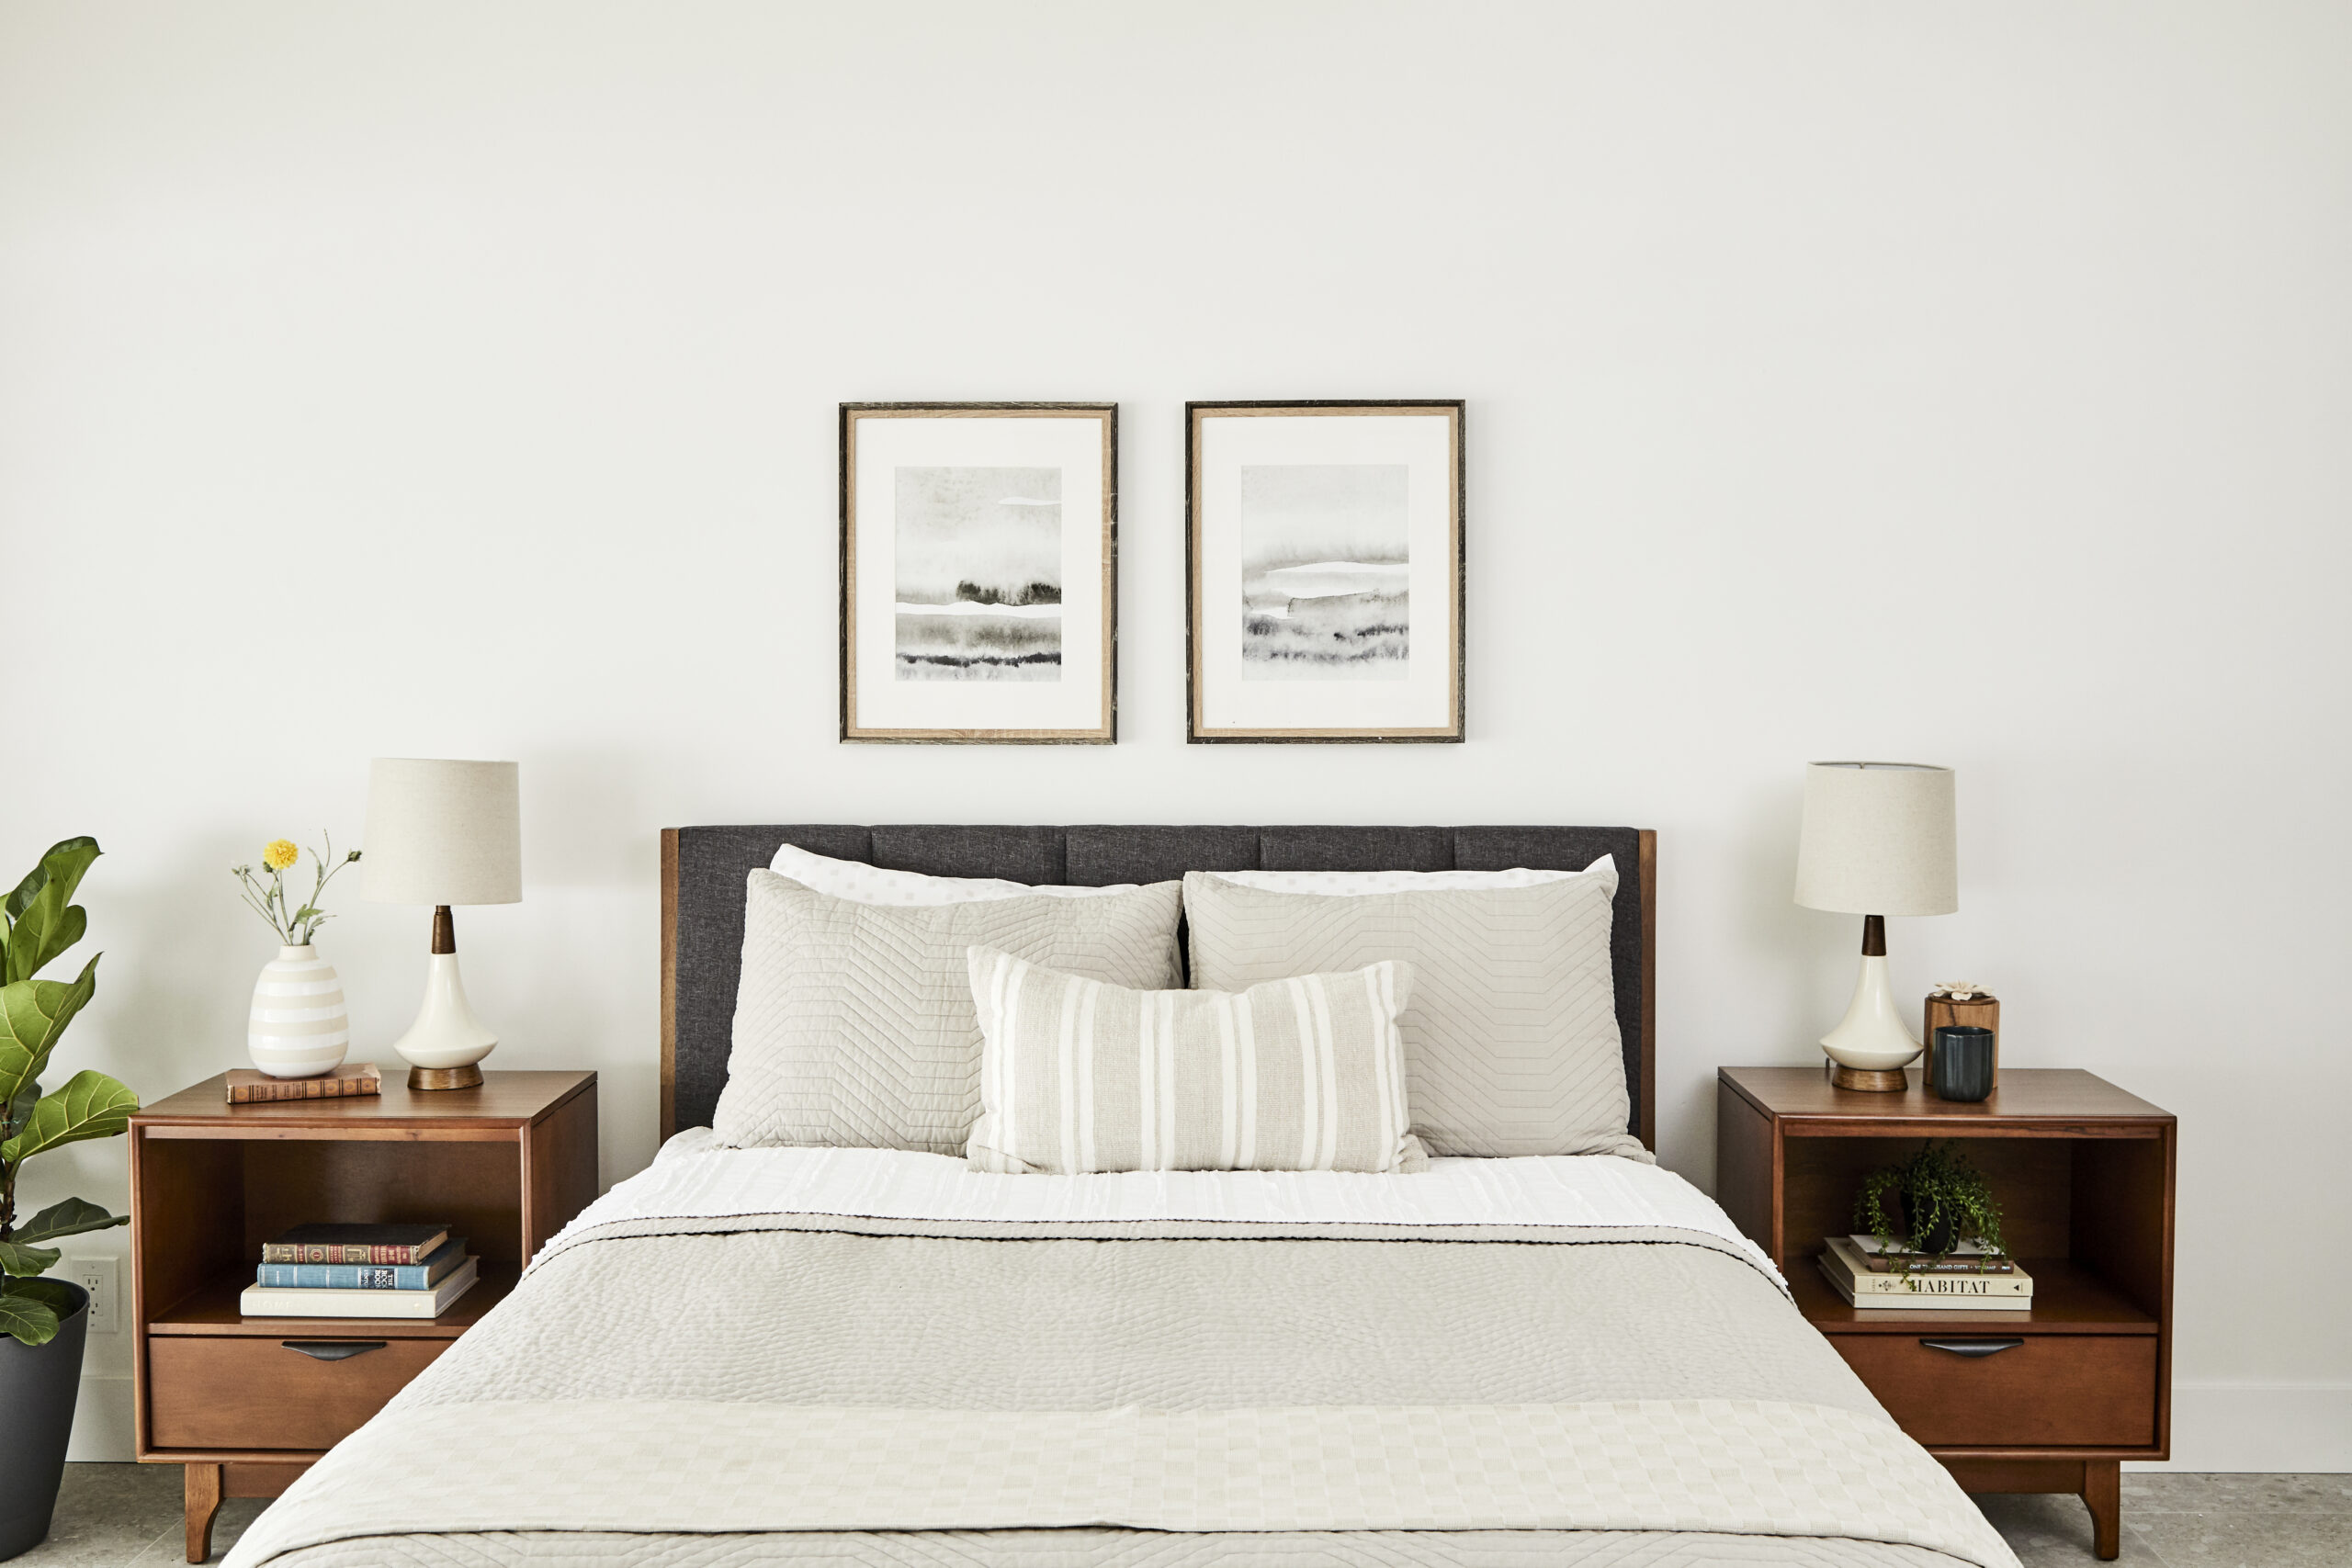 Neutral colored bedroom. Socalhomebuyers.com.